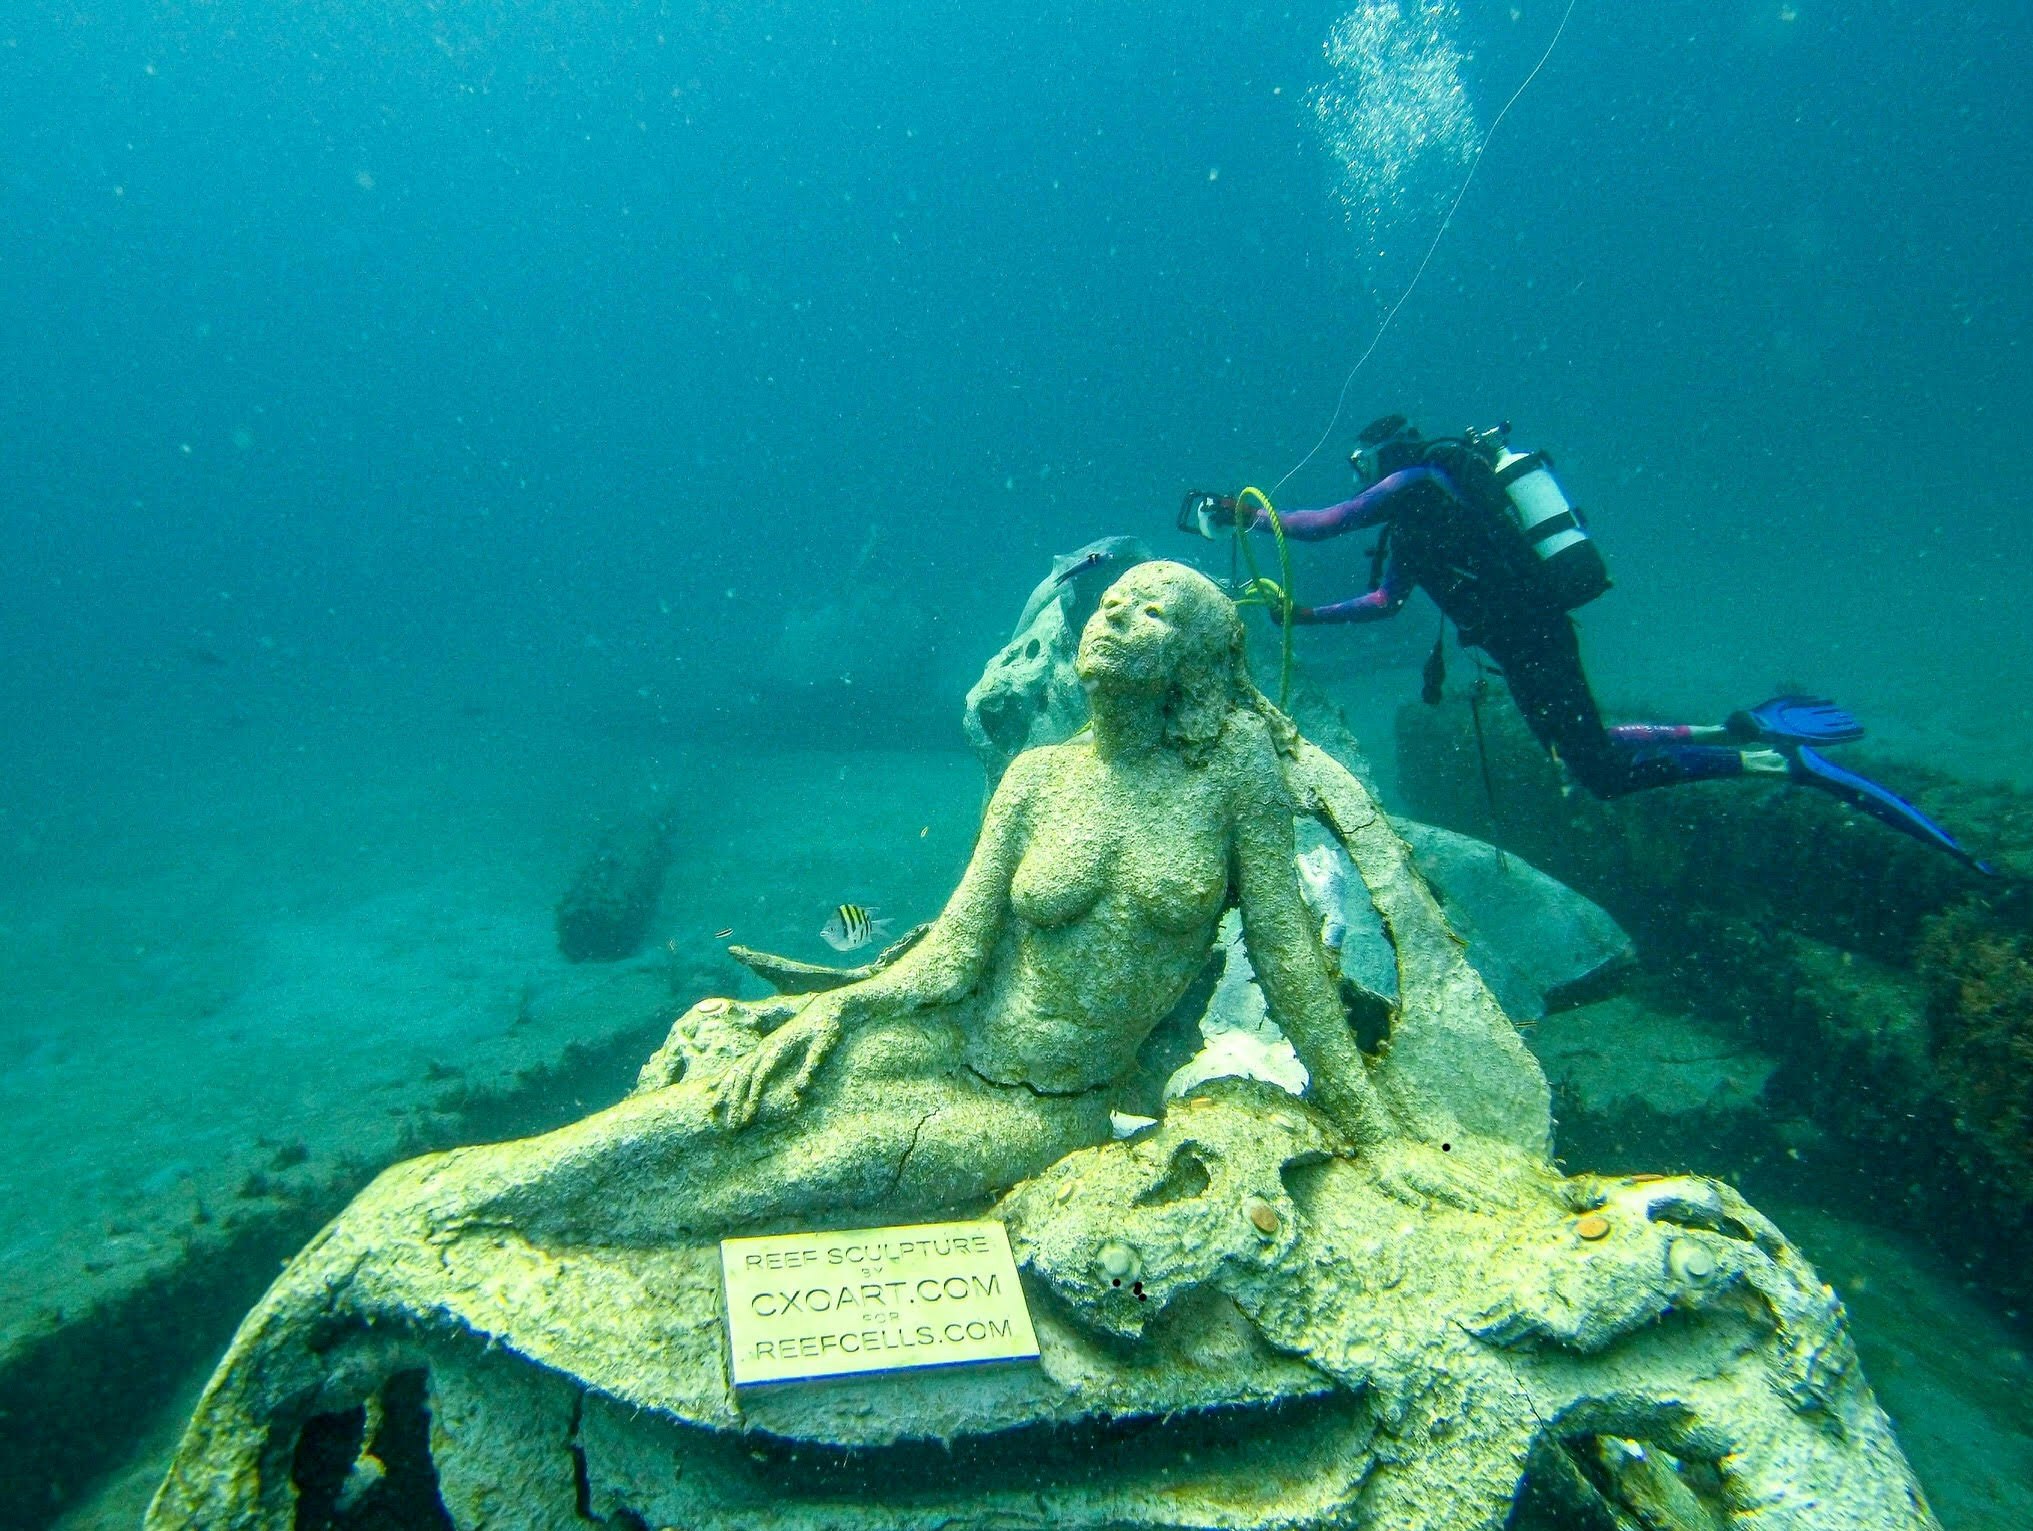 Underwater shot of a mermaid sculpture at the bottom of the ocean. In the background a scuba diver appears to measuring something. 